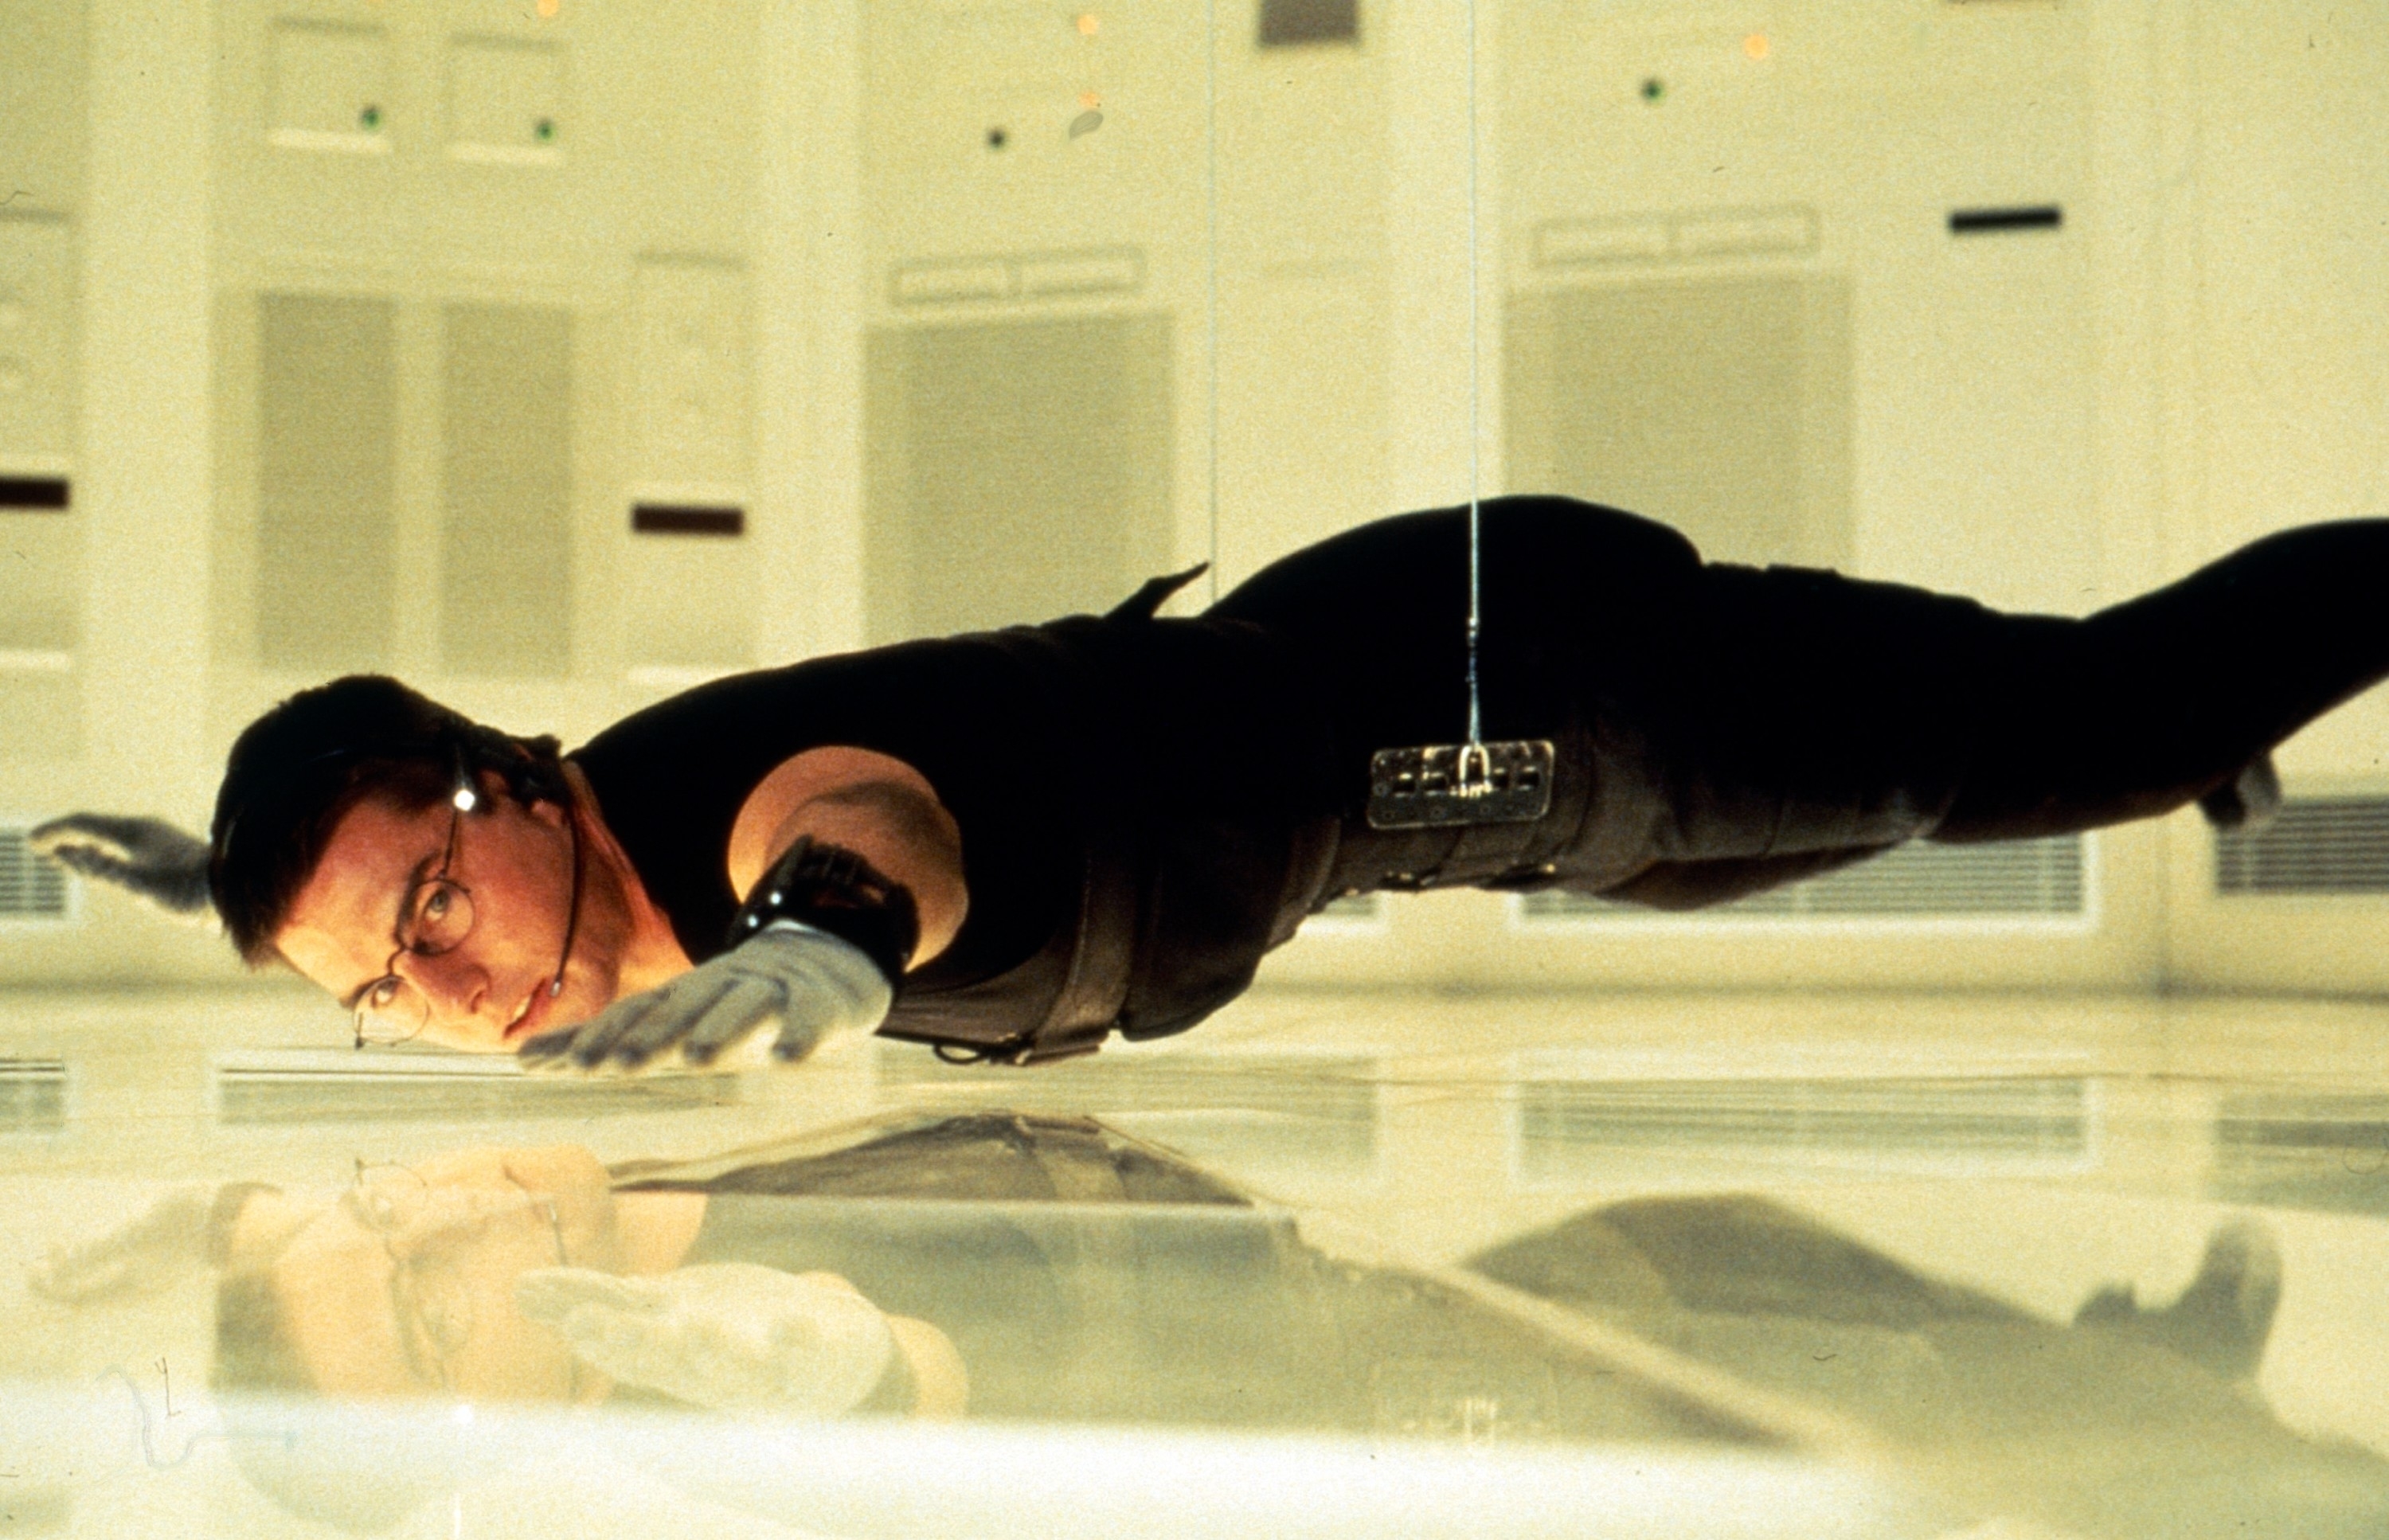 Ethan Hunt, a character from Mission: Impossible, is suspended mid-air during a heist scene